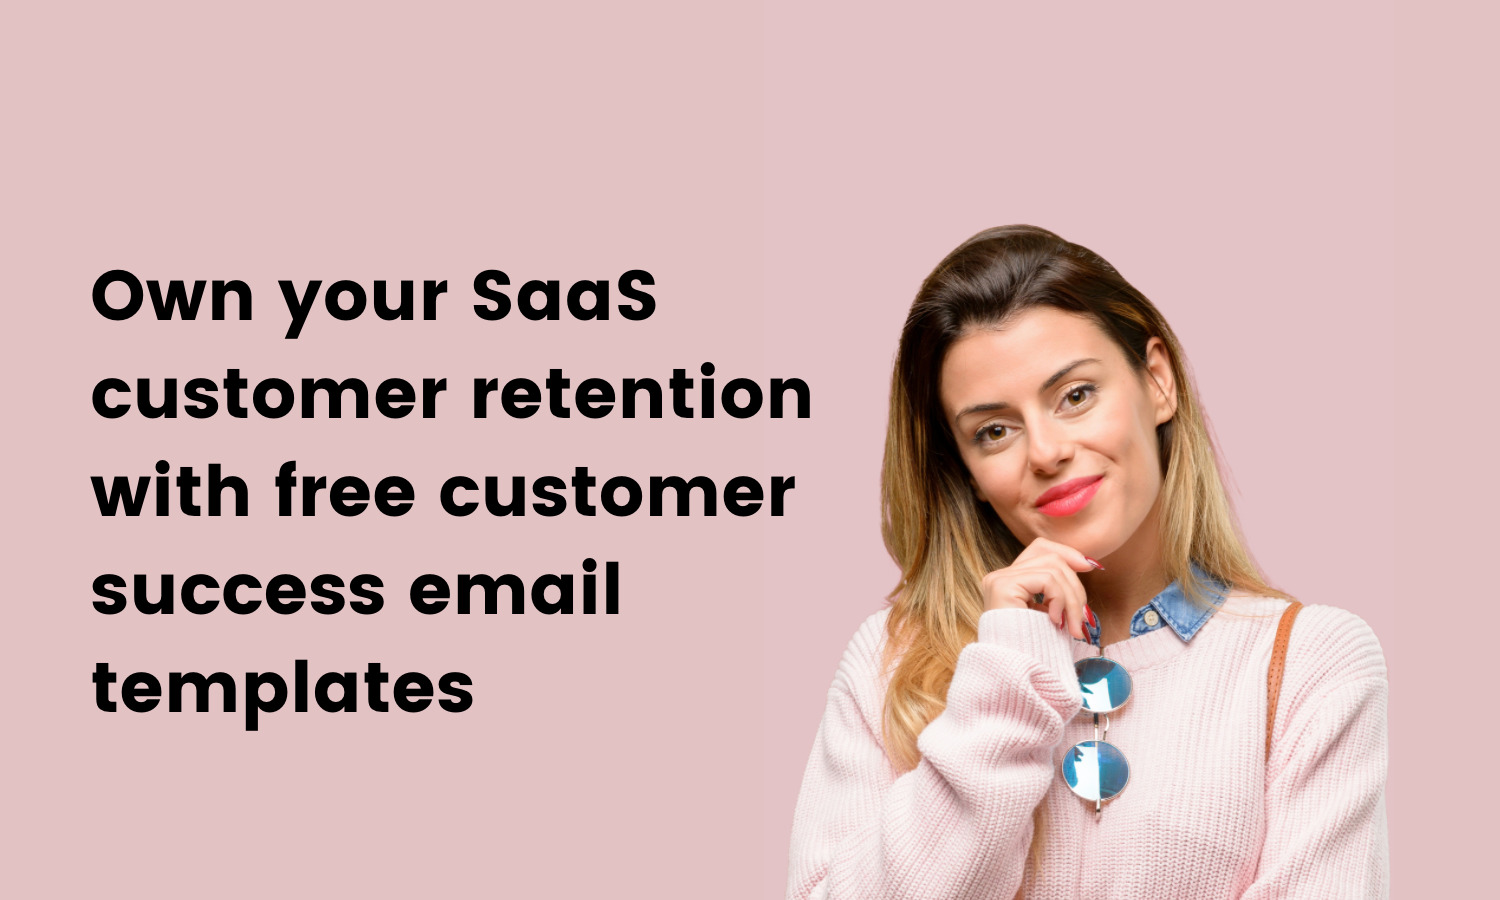 own-your-saas-customer-retention-free-customer-success-email-templates